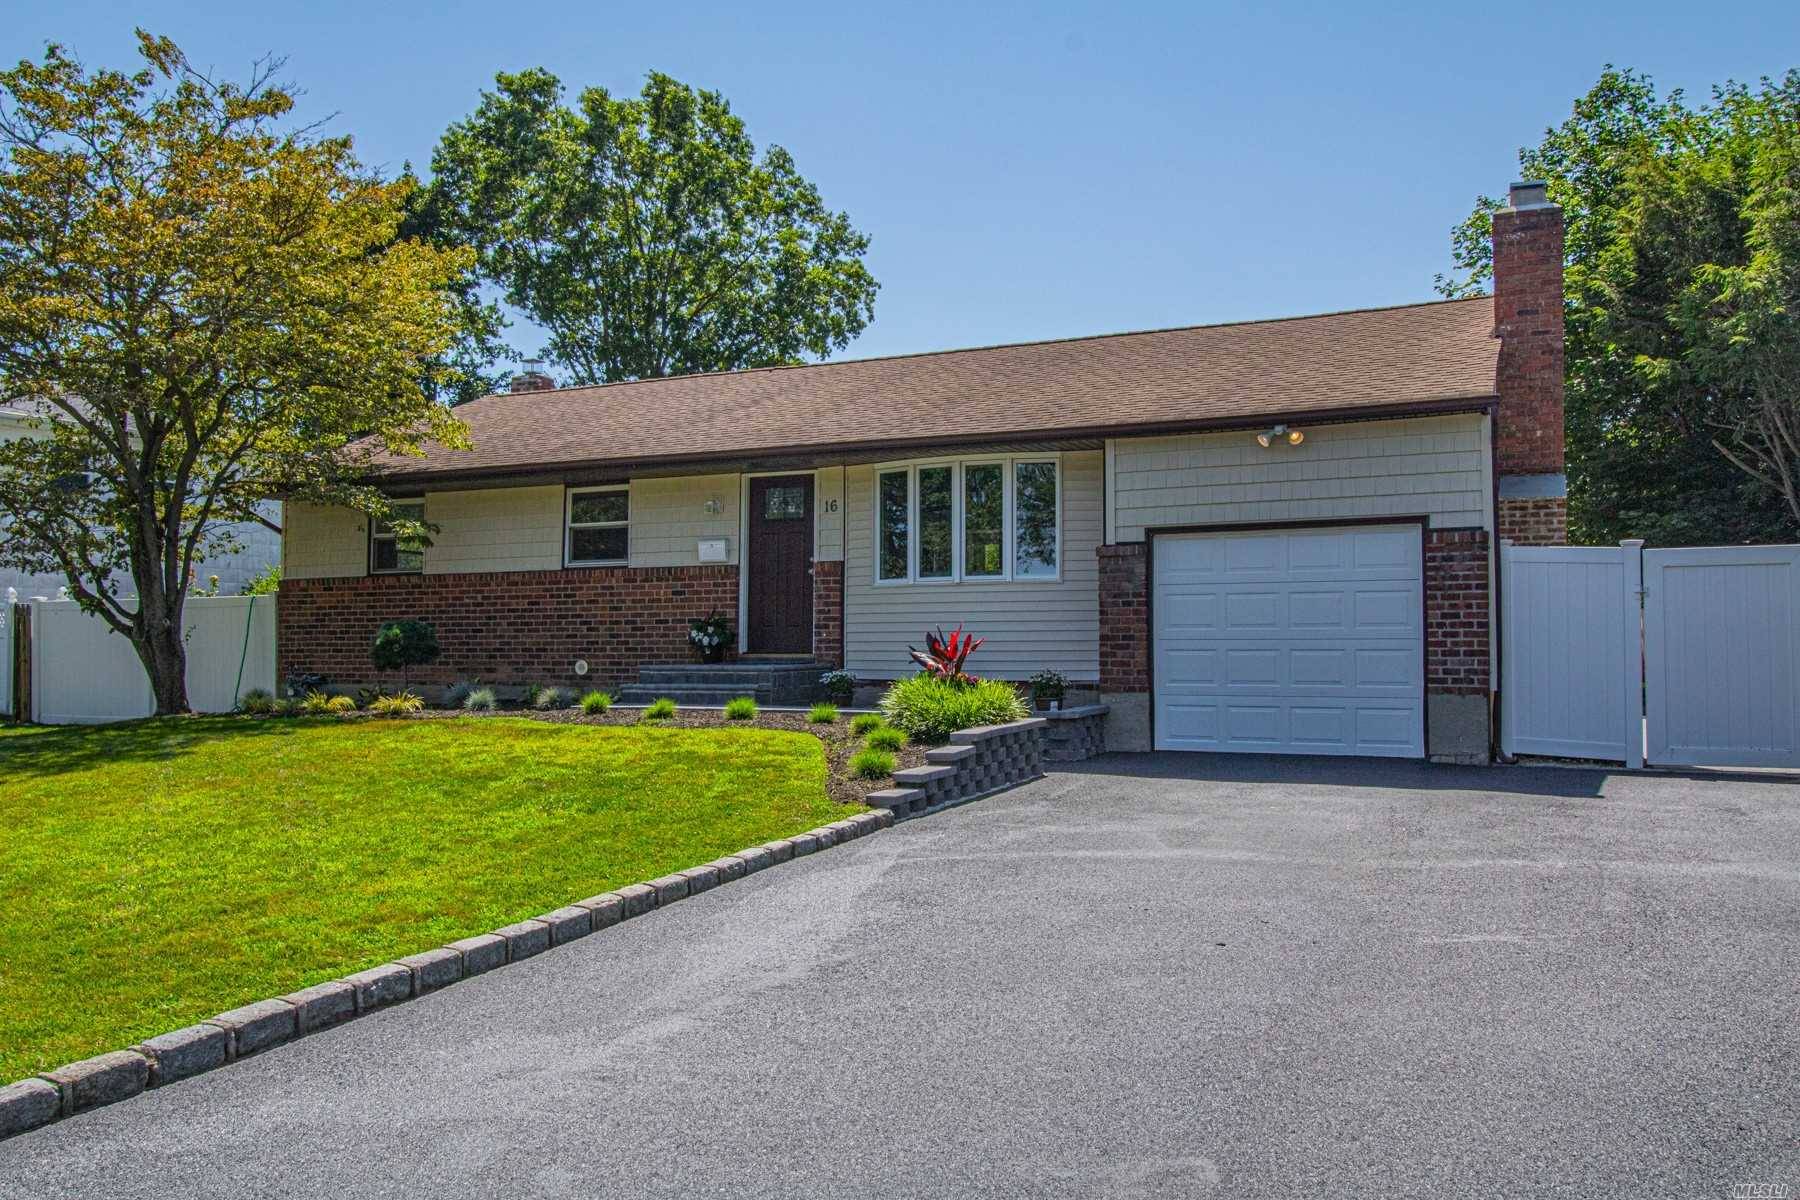 Newly renovated ranch located near Commack High School and Park with easy access to the Northern State and Jericho Tnpk.